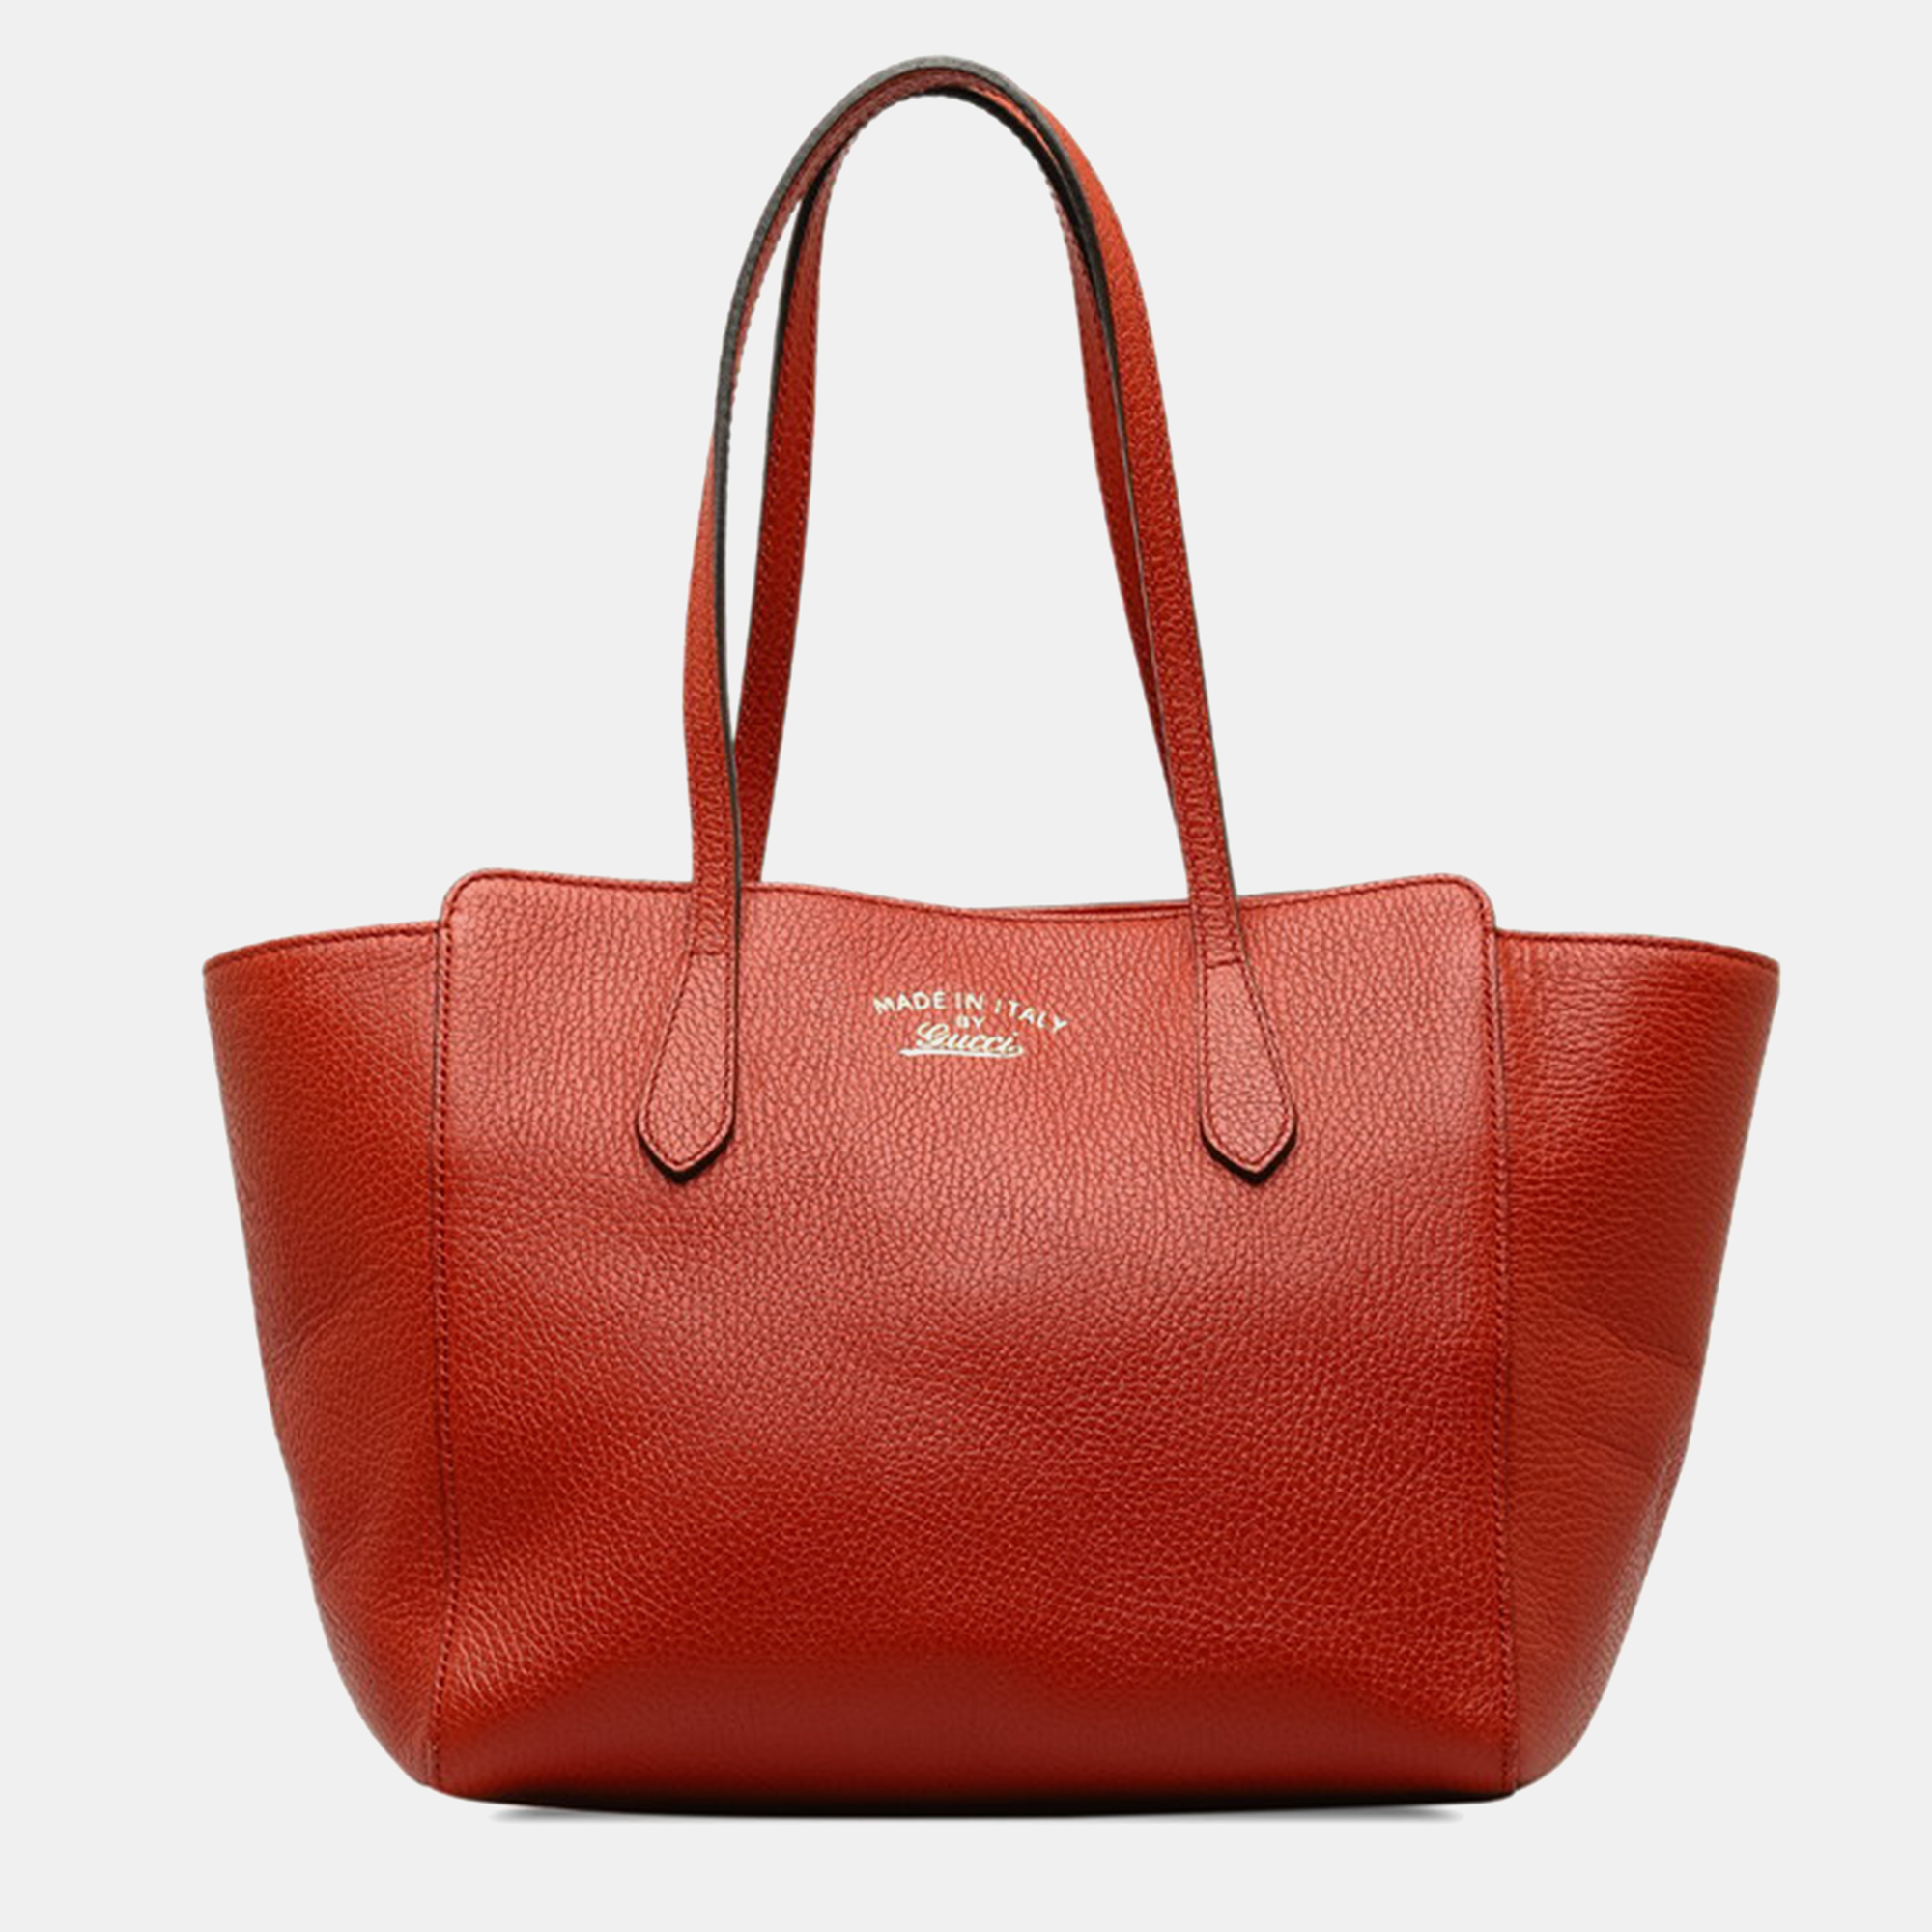 Gucci red leather swing tote bag